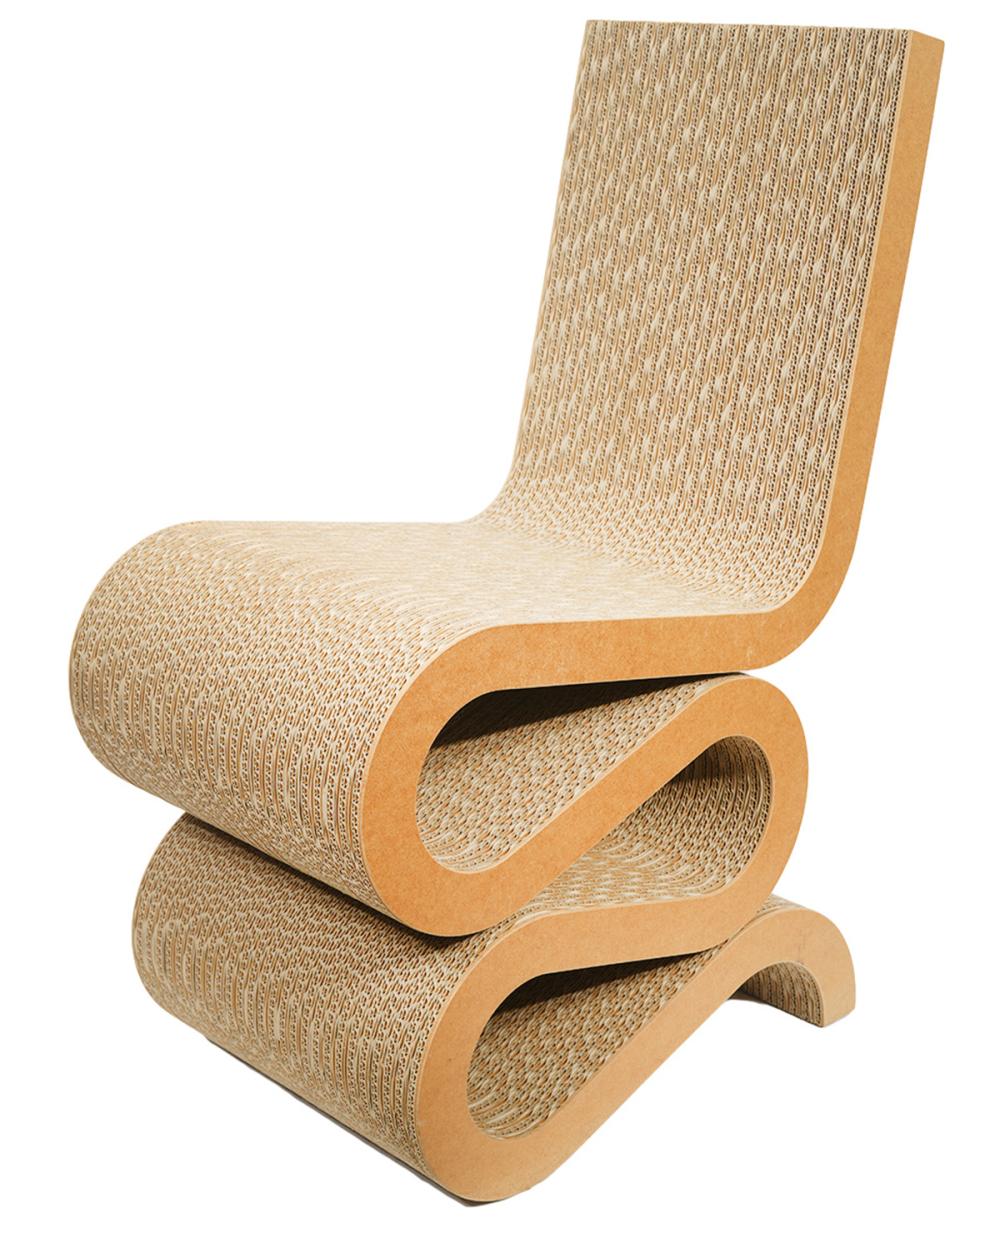 FRANK GEHRY WIGGLE SIDE CHAIR Frank 2ce689